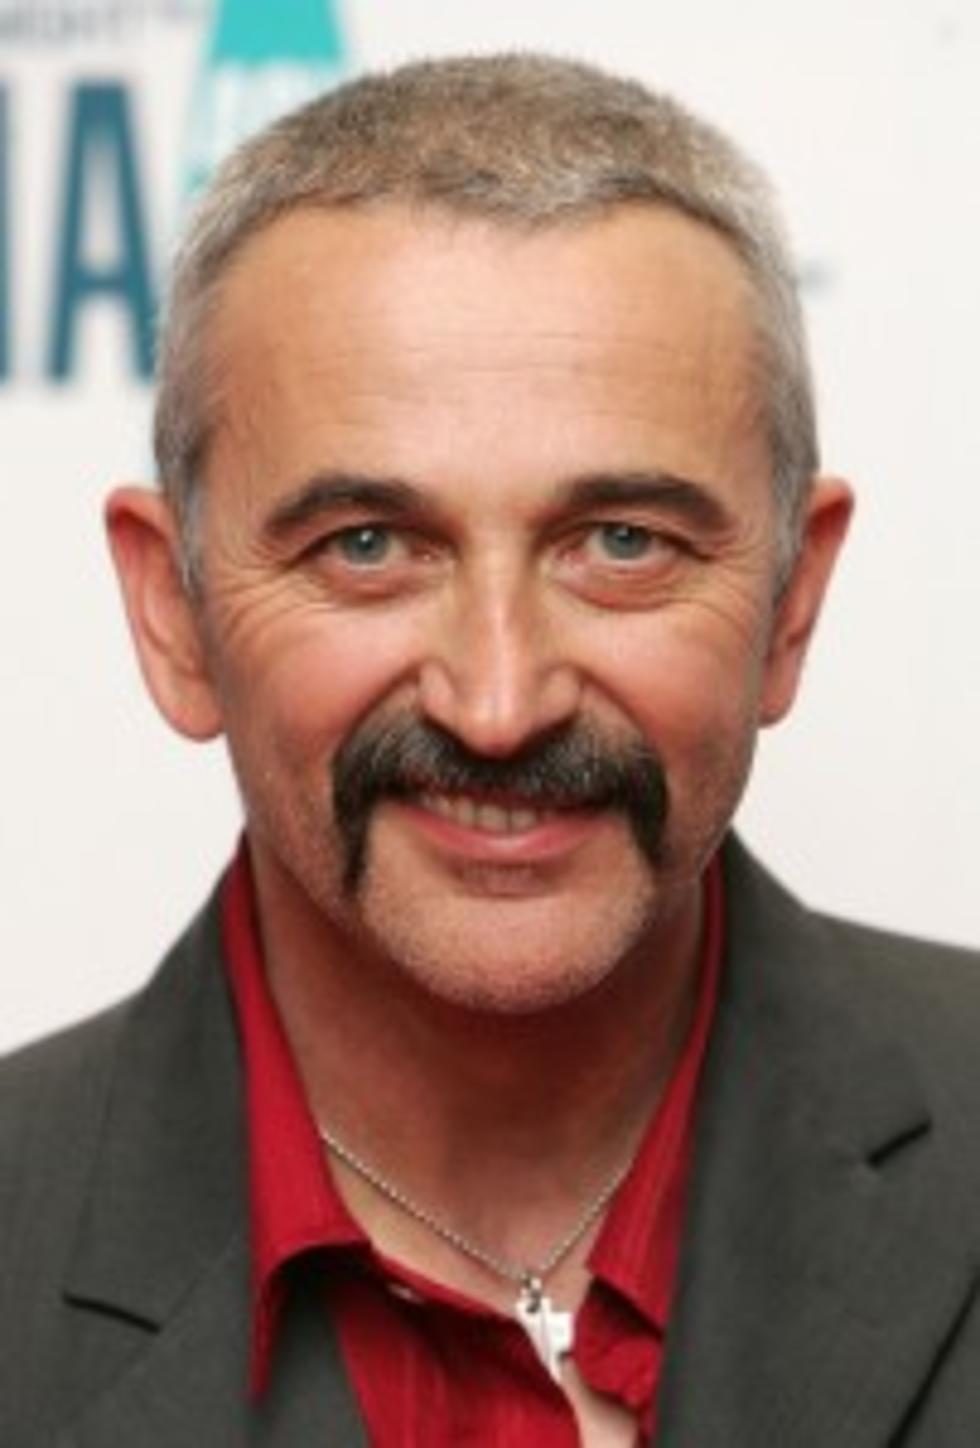 Country Throwback Honors America and the Last Top Ten Hit From Aaron Tippin [VIDEO]